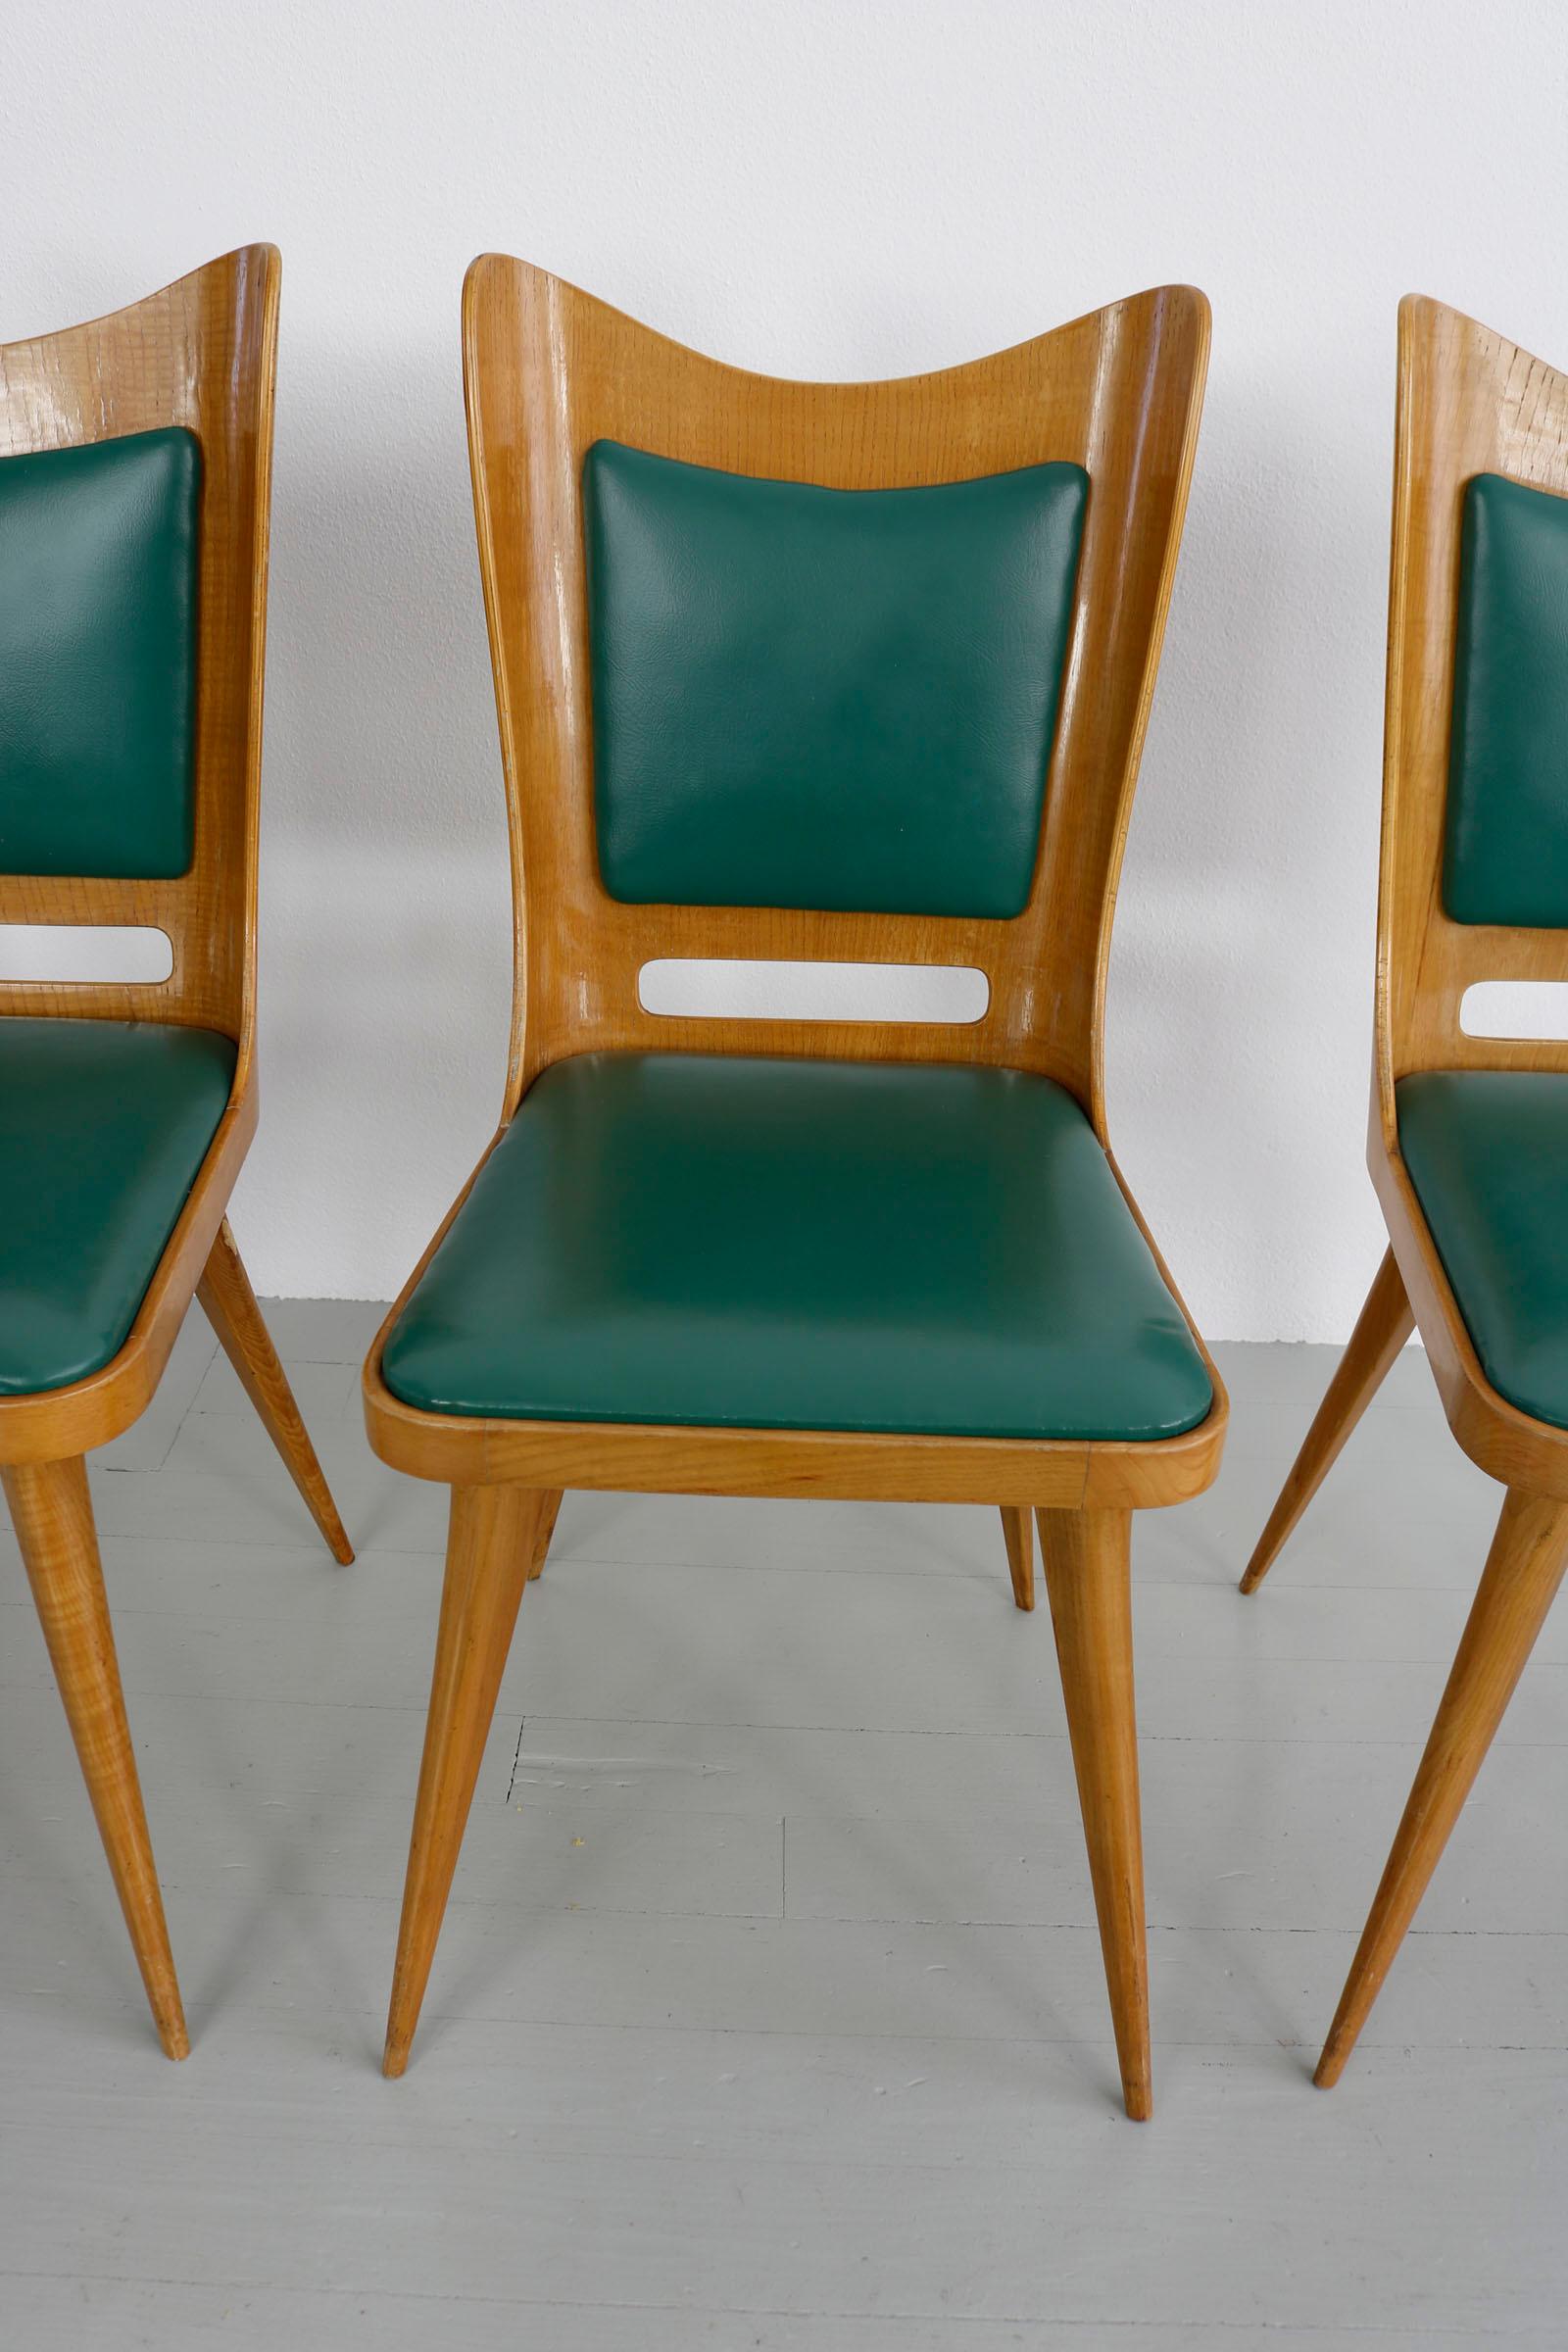 Set of Six Italian Wooden Dining Chairs with Green Upholstery, 1950 For Sale 13